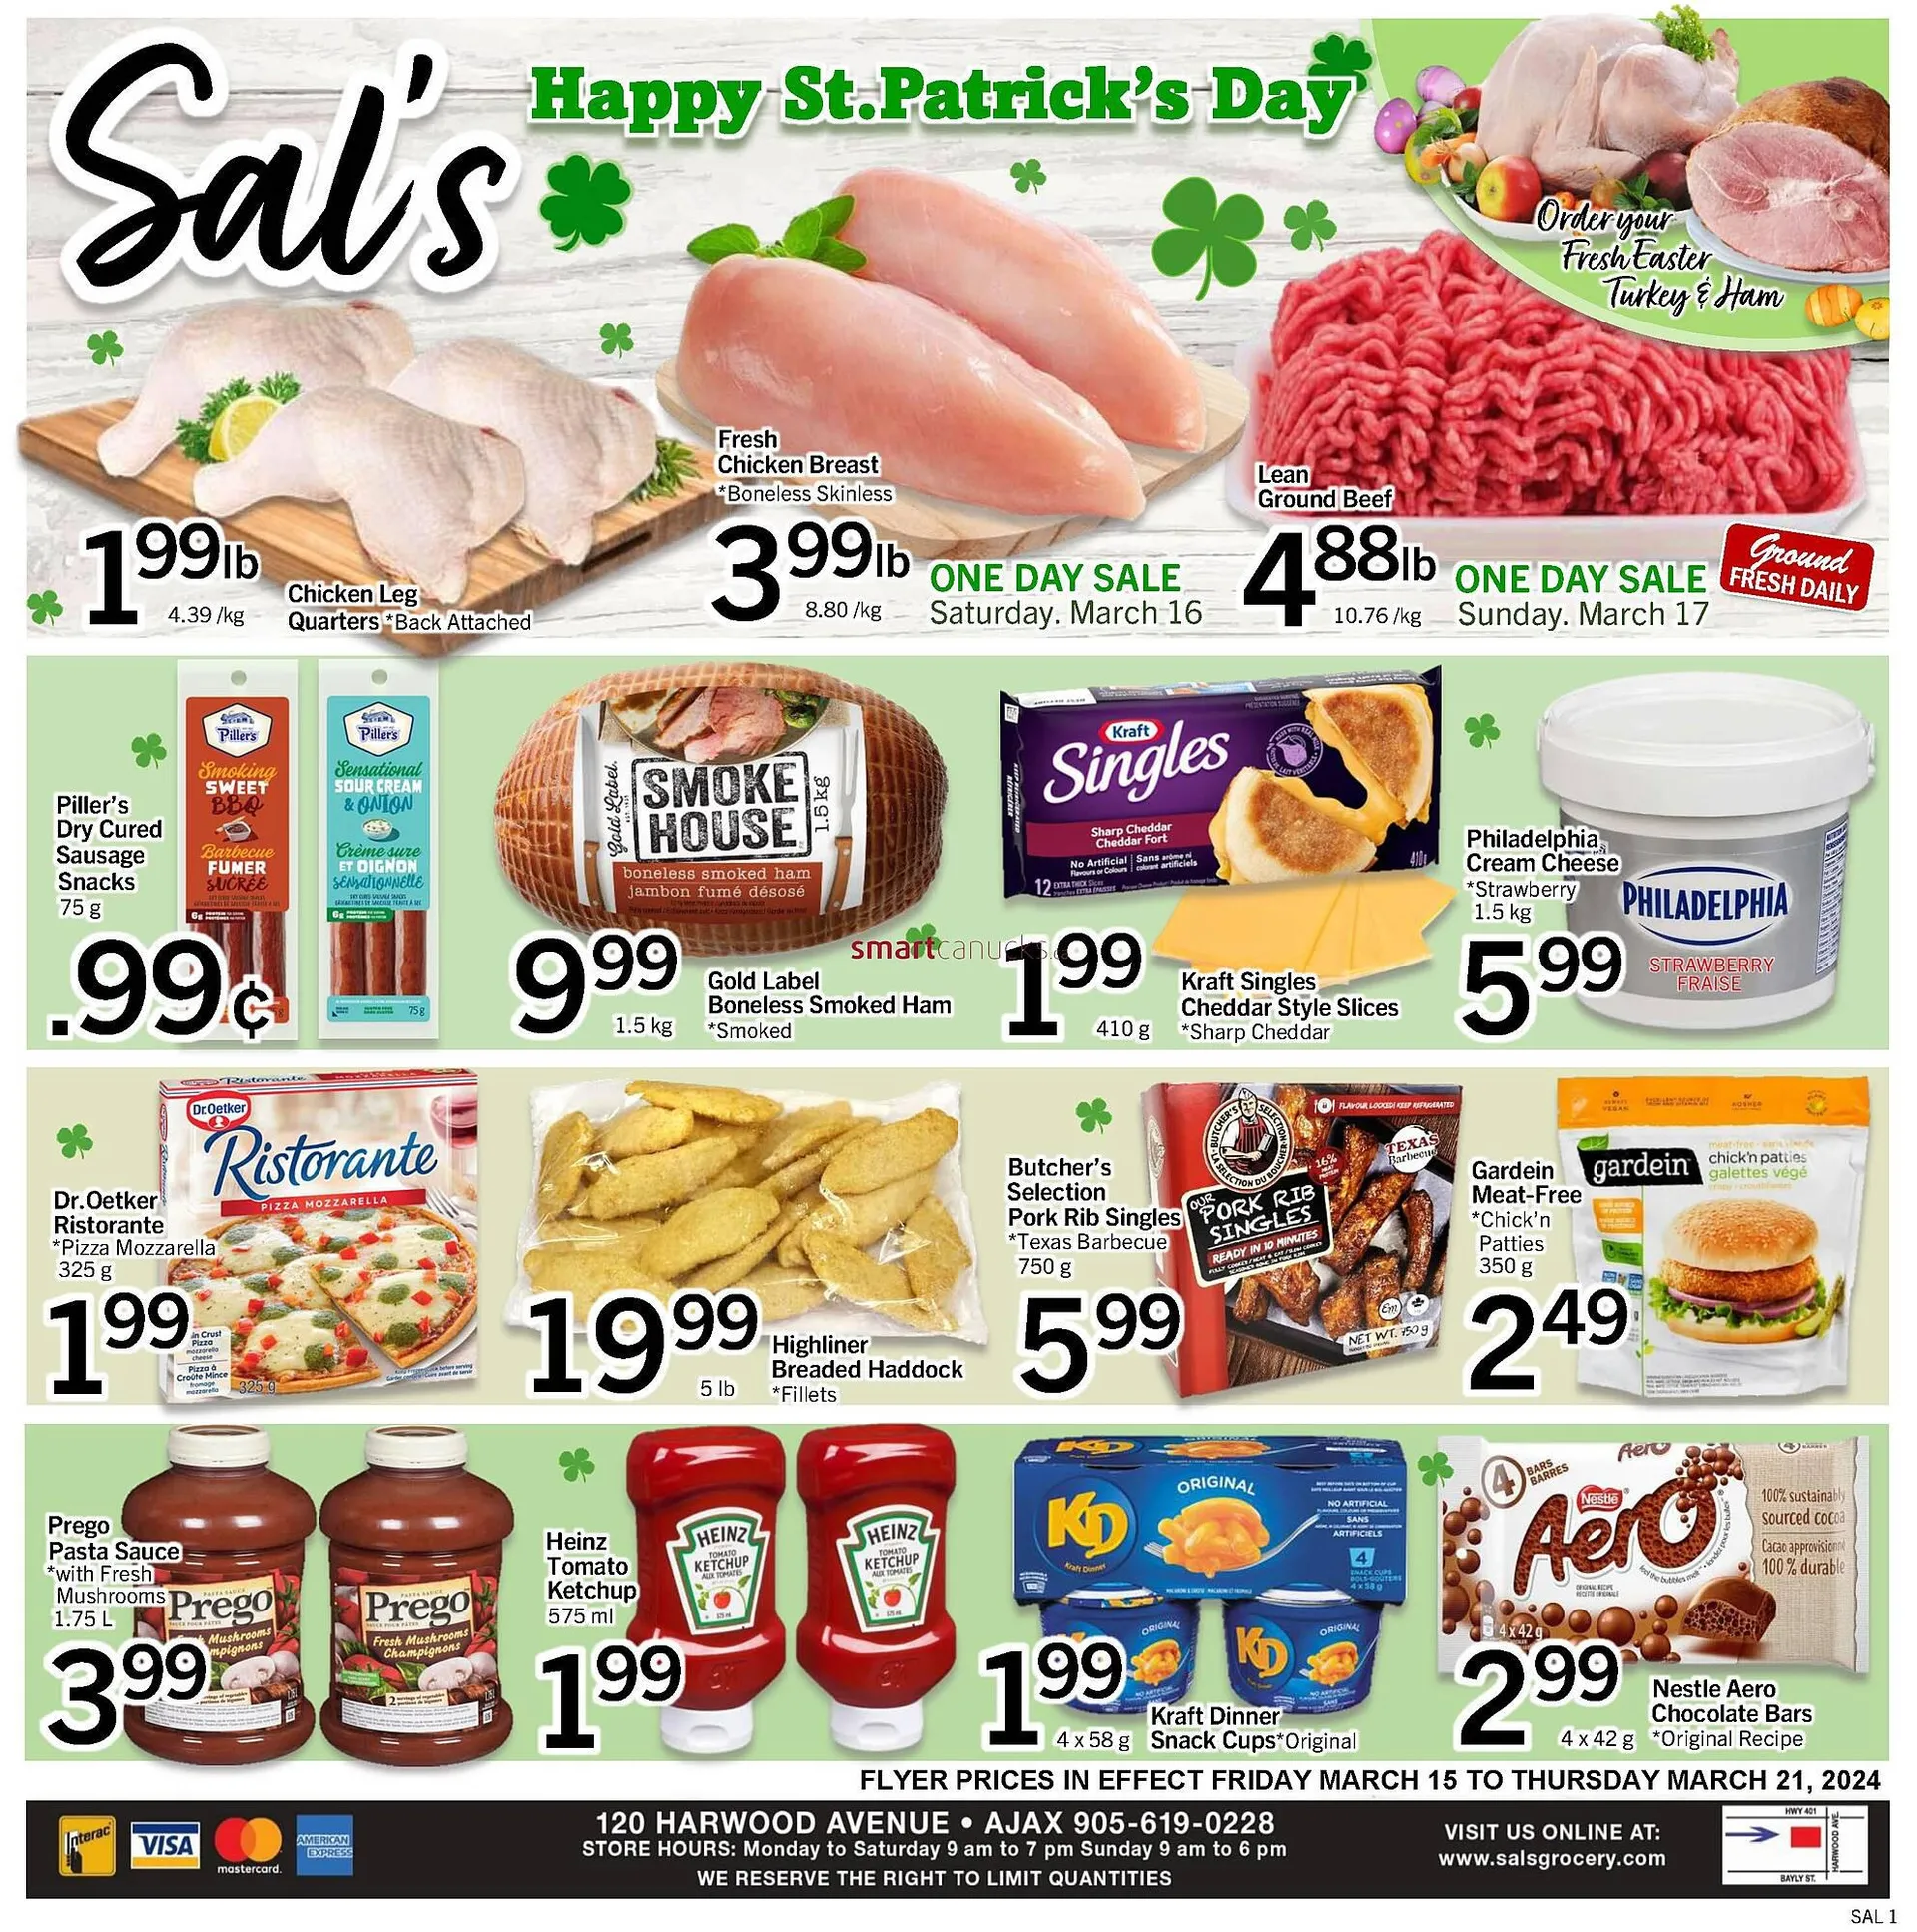 Sal's Grocery flyer from March 15 to March 21 2024 - flyer page 